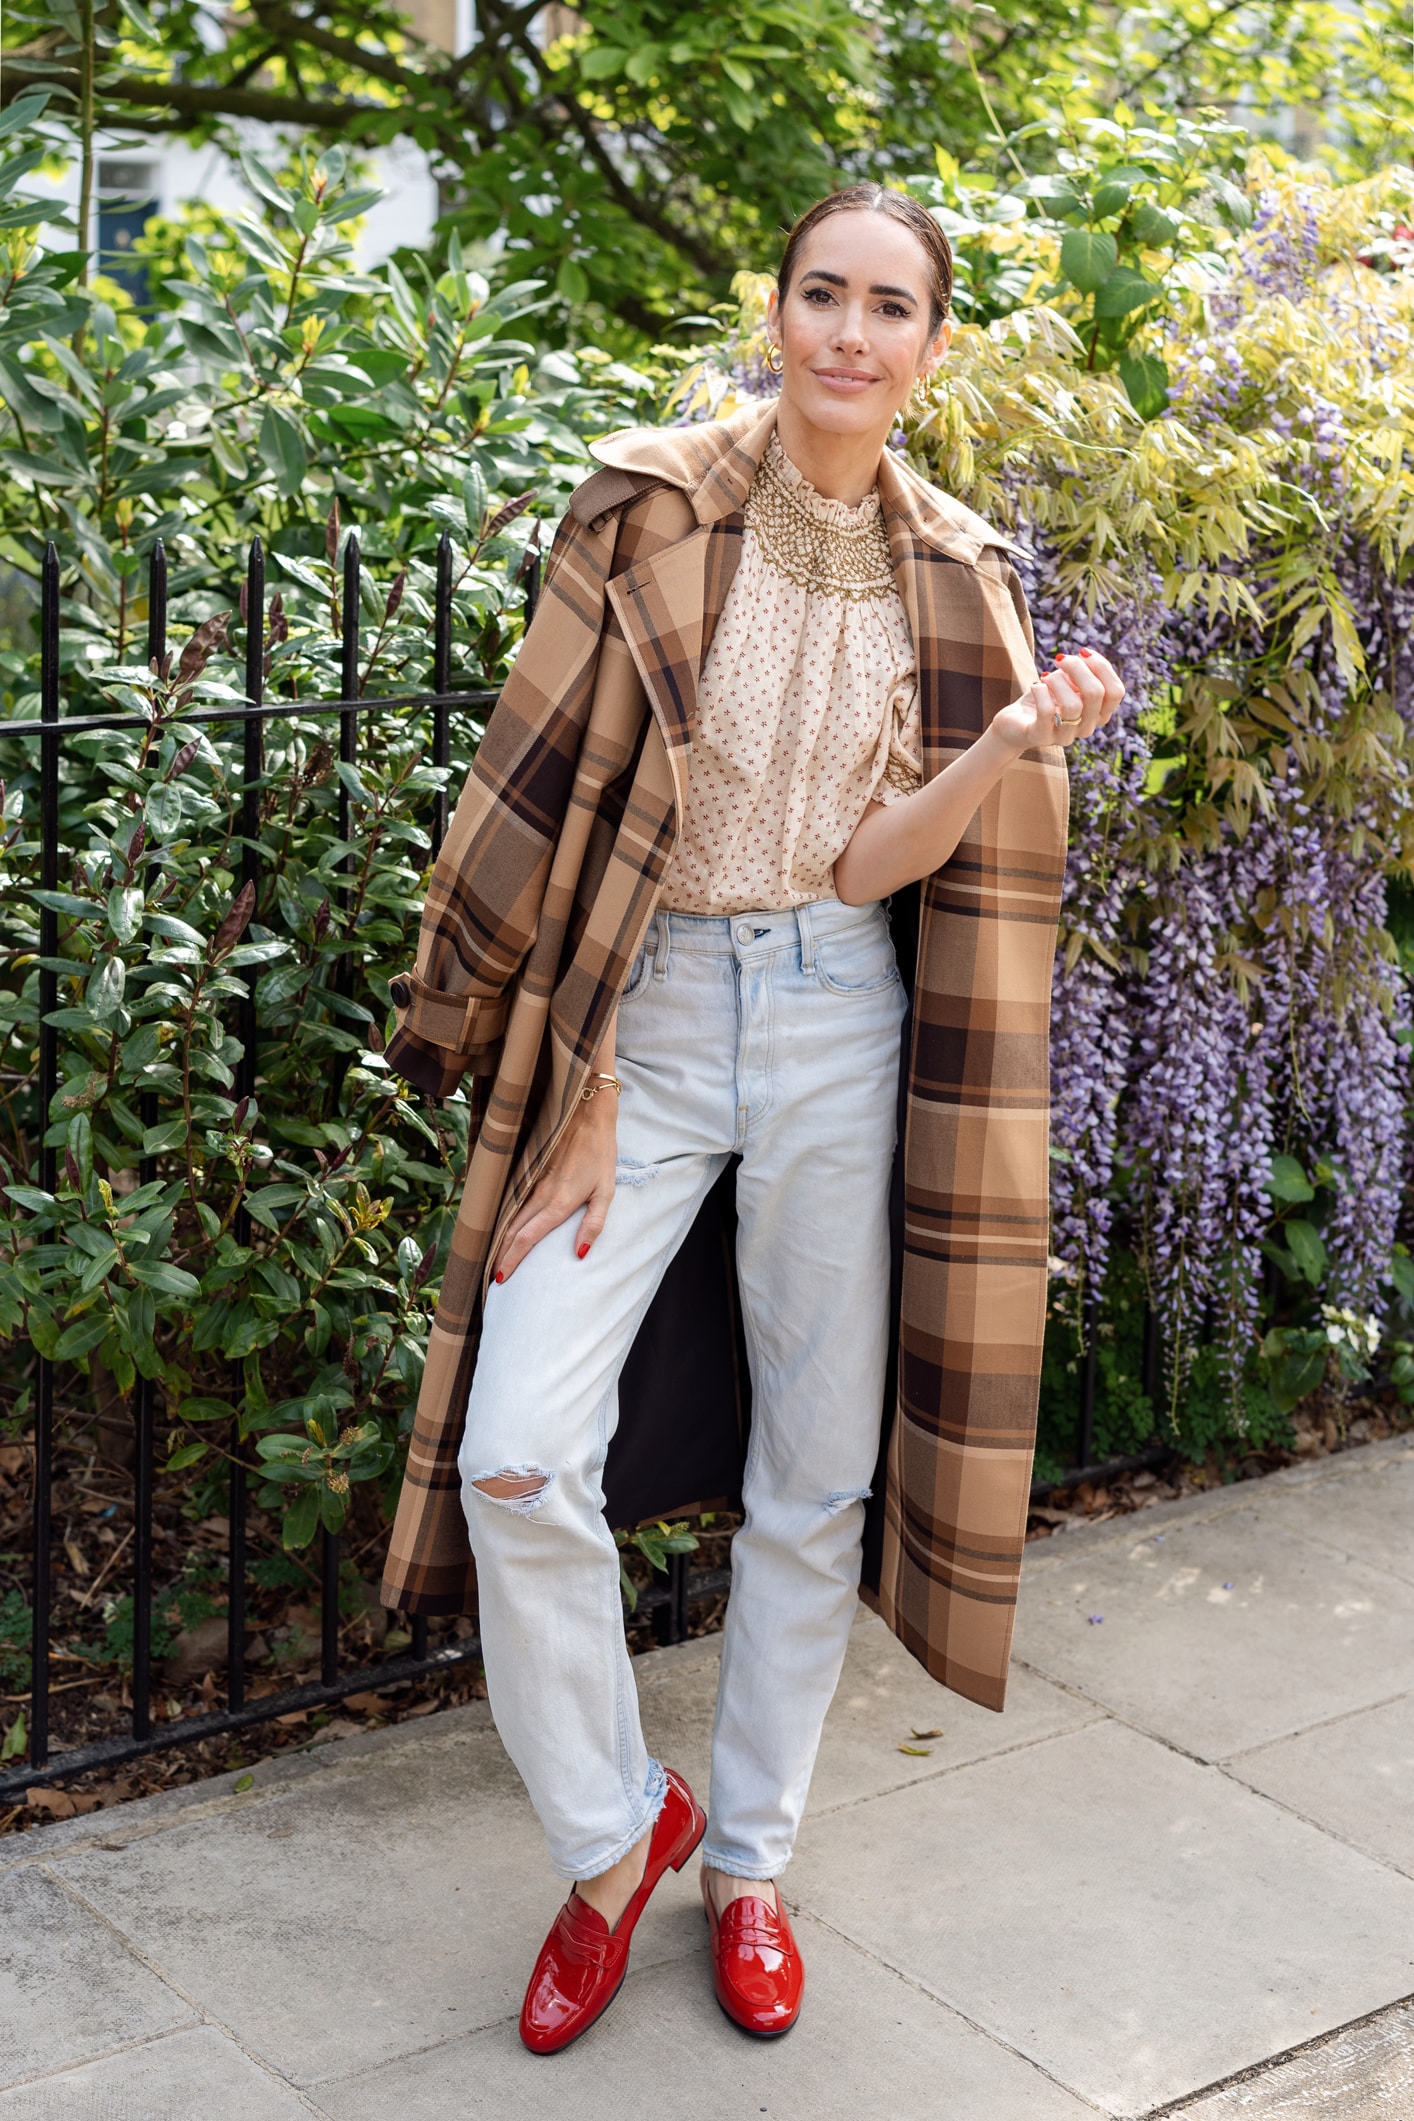 The Classic Trench – With a Twist